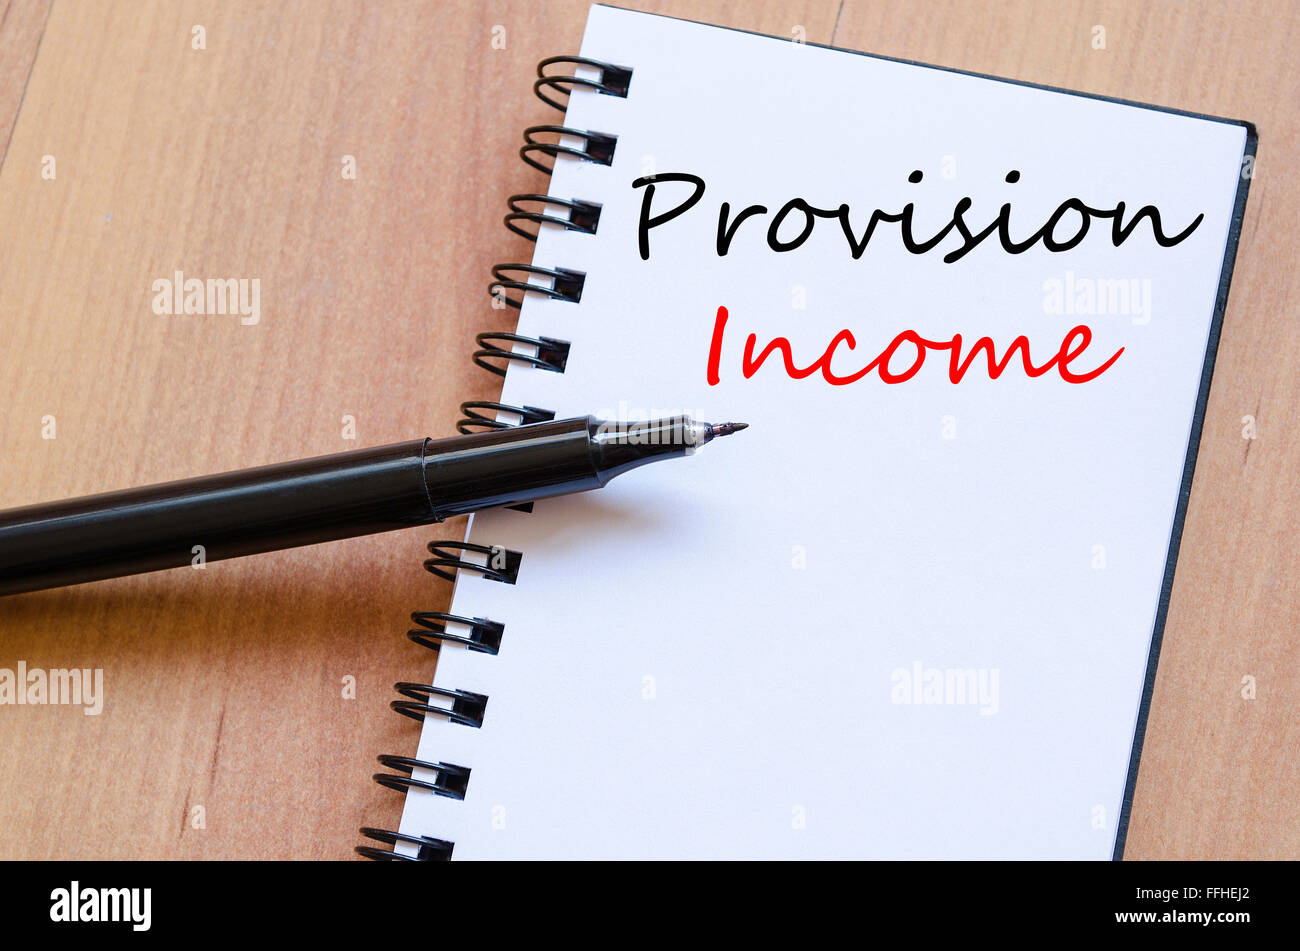 Provision income text concept write on notebook Stock Photo